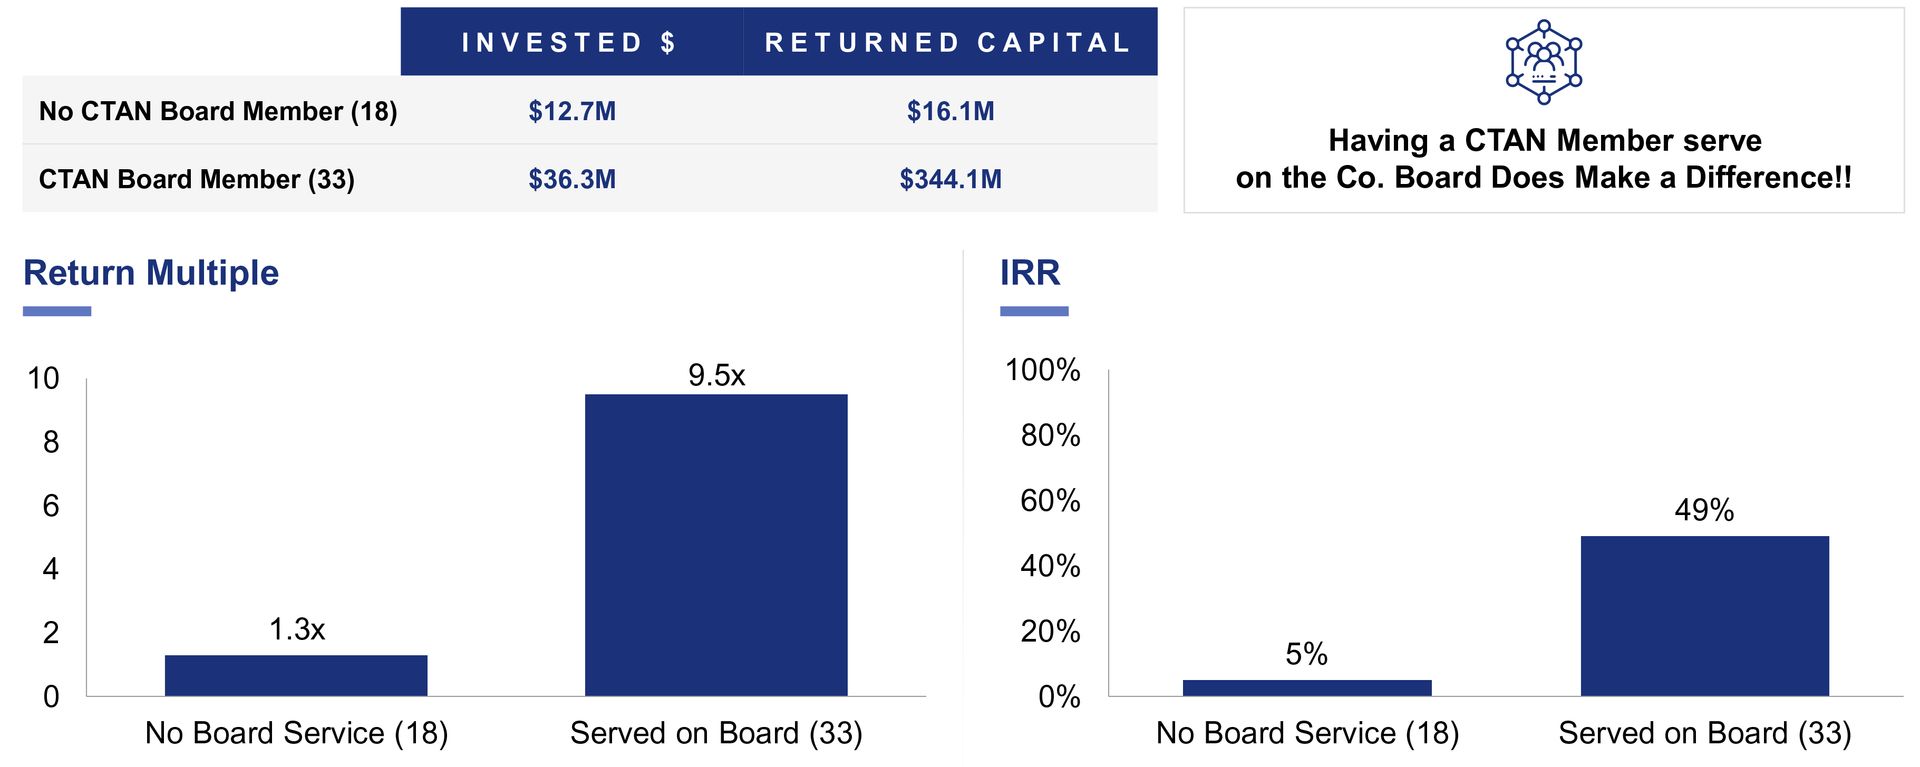 Exits-IRR and Return Performance
and Serving on Board